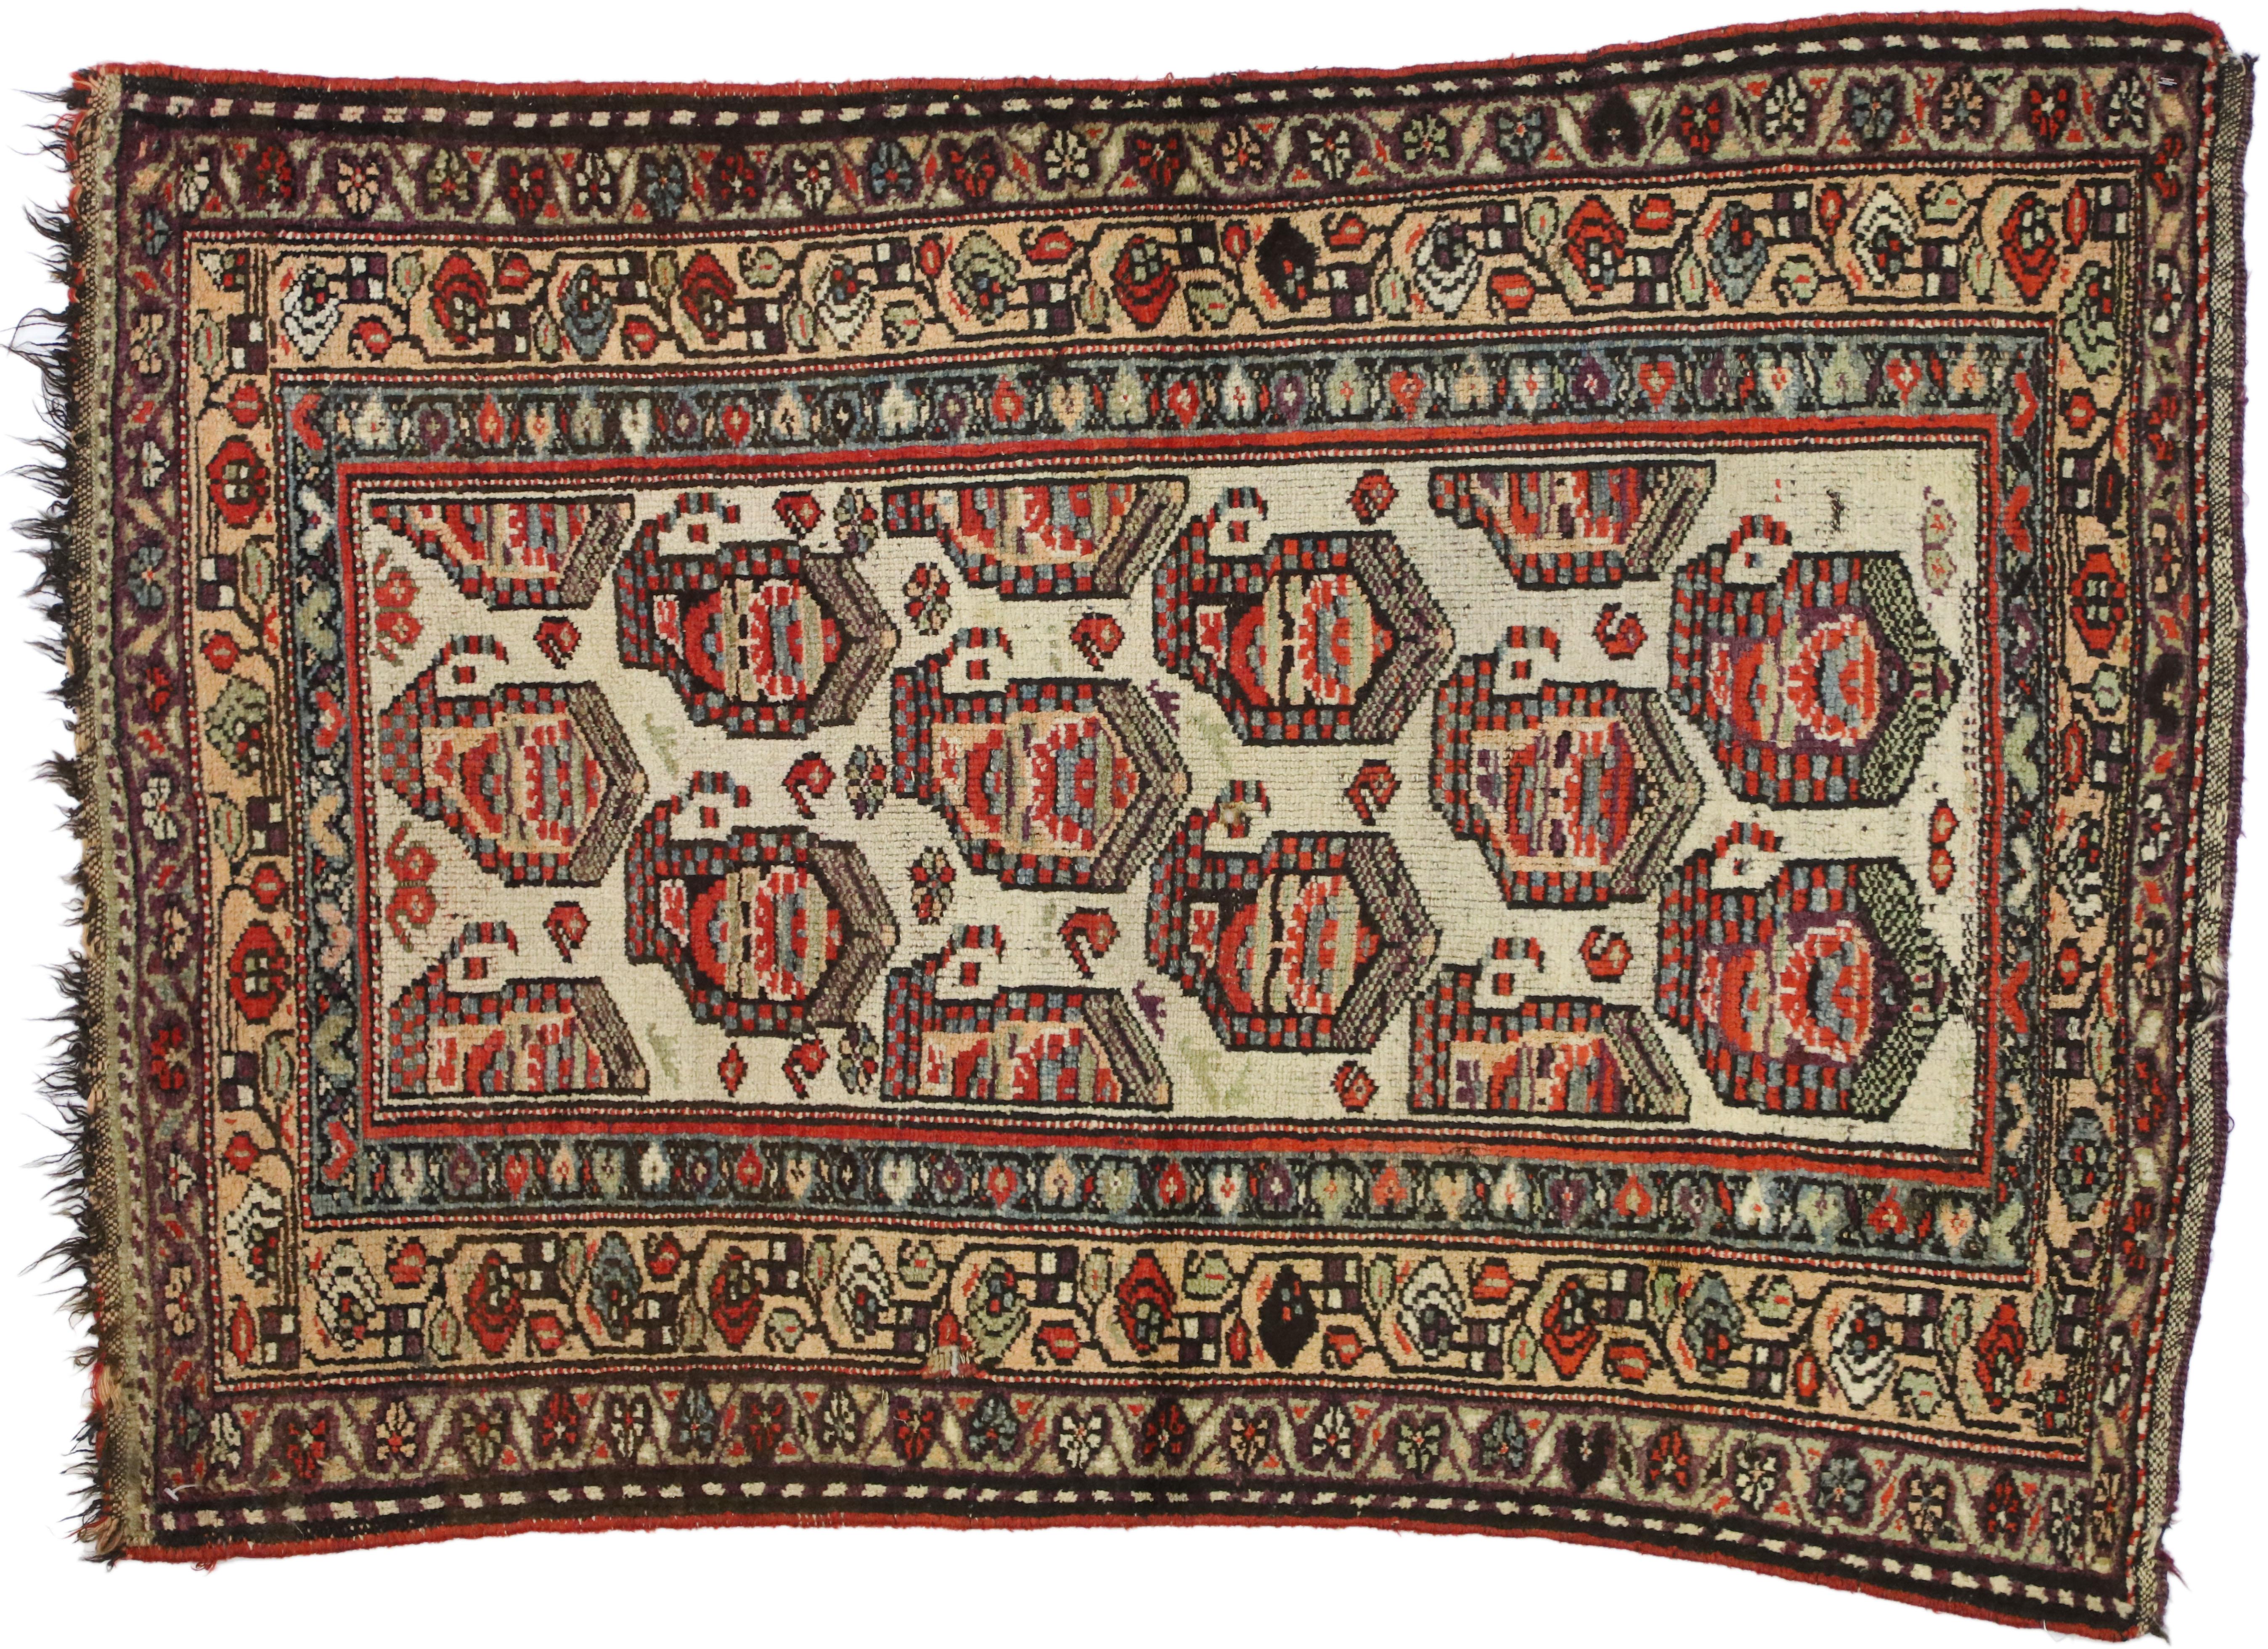 Early 20th Century Antique Kurdish Persian Accent Rug with Boteh Pattern in Traditional Style For Sale